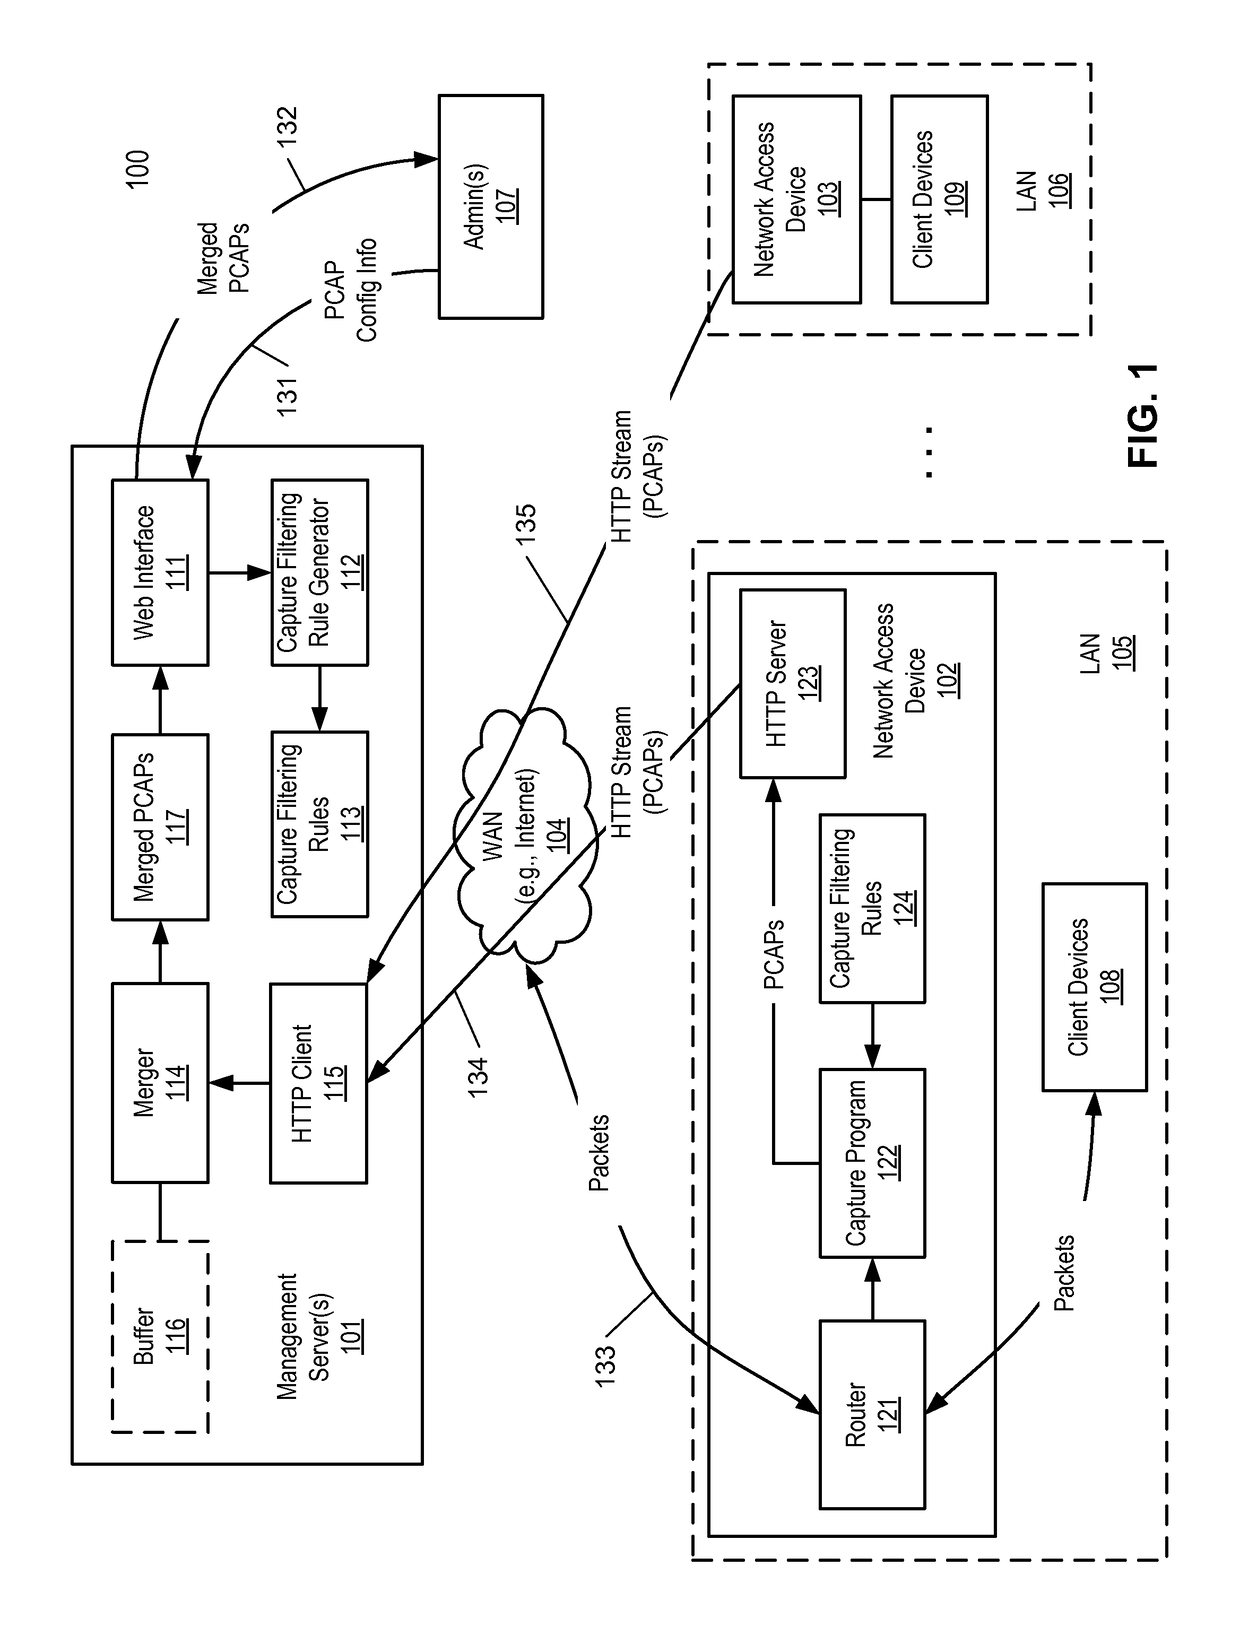 Method for streaming packet captures from network access devices to a cloud server over HTTP